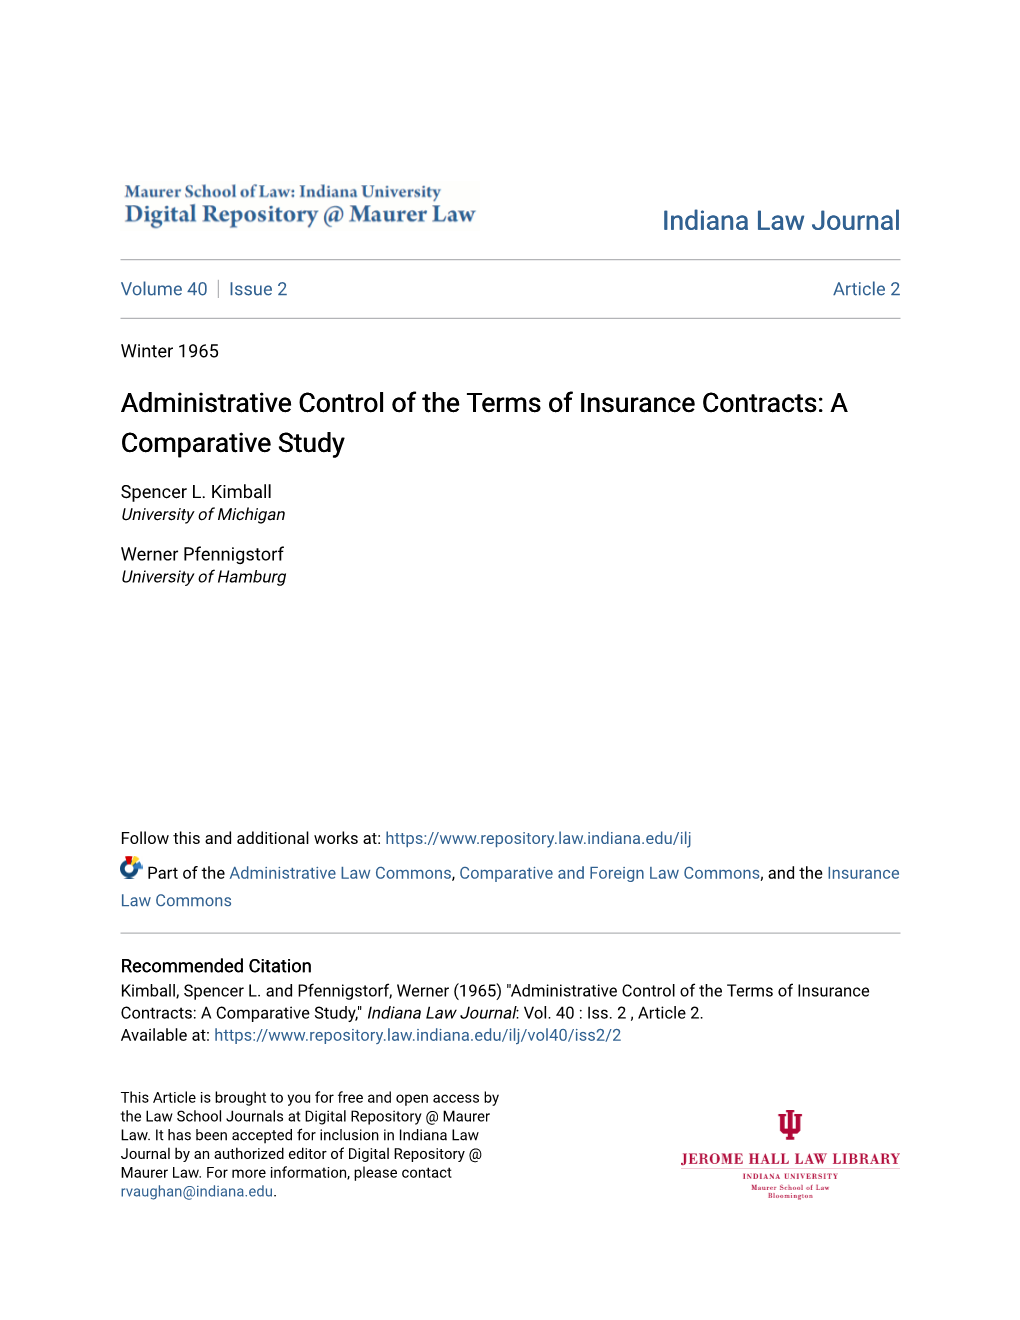 Administrative Control of the Terms of Insurance Contracts: a Comparative Study